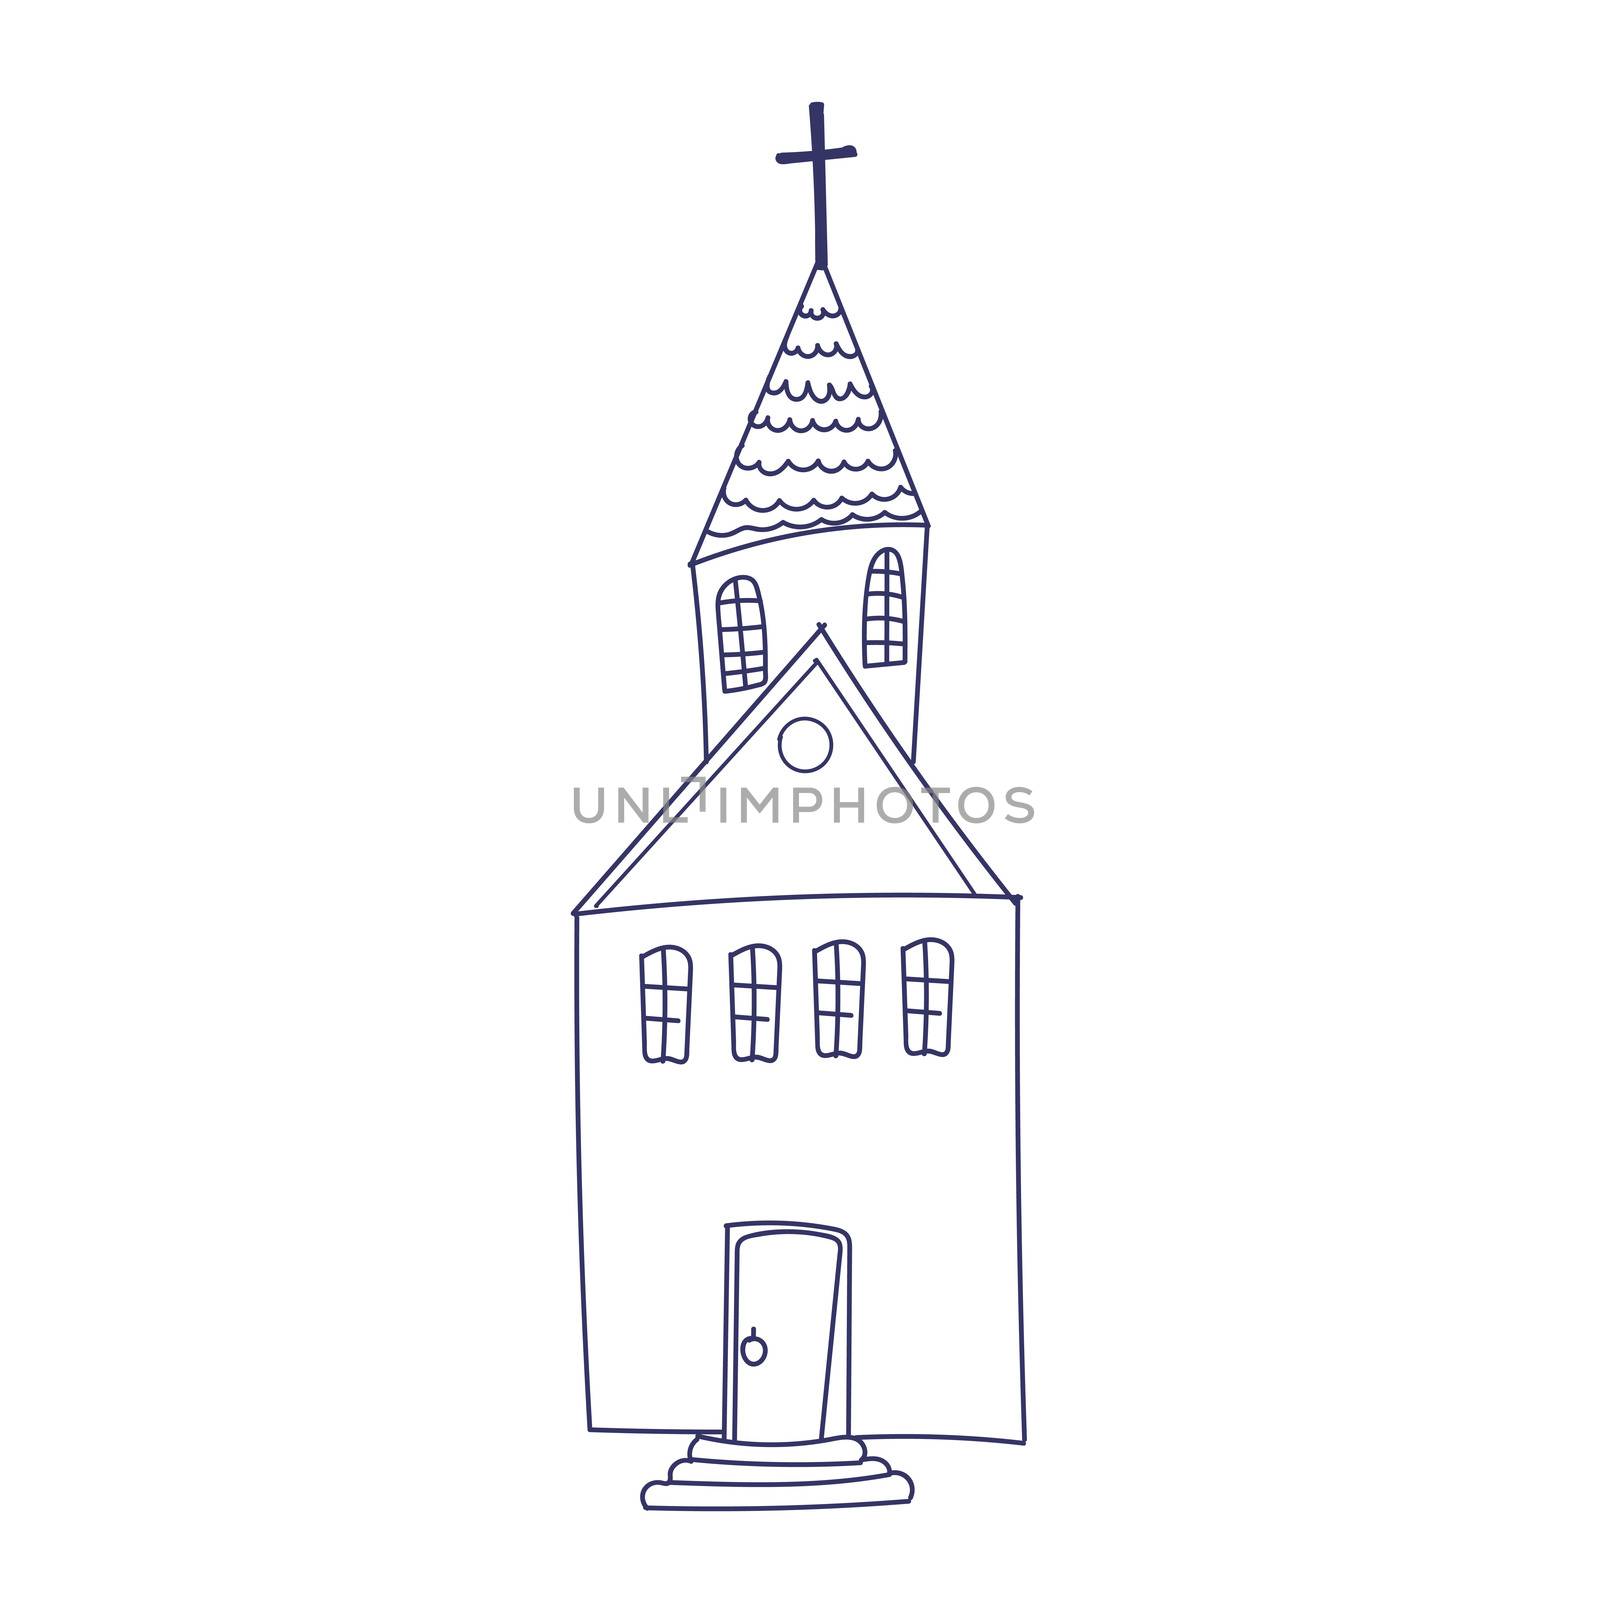 Hand drawn doodle Christian building church icon with Catholic cross illustration sketchy traditional symbol Cute cartoon religious concept element.